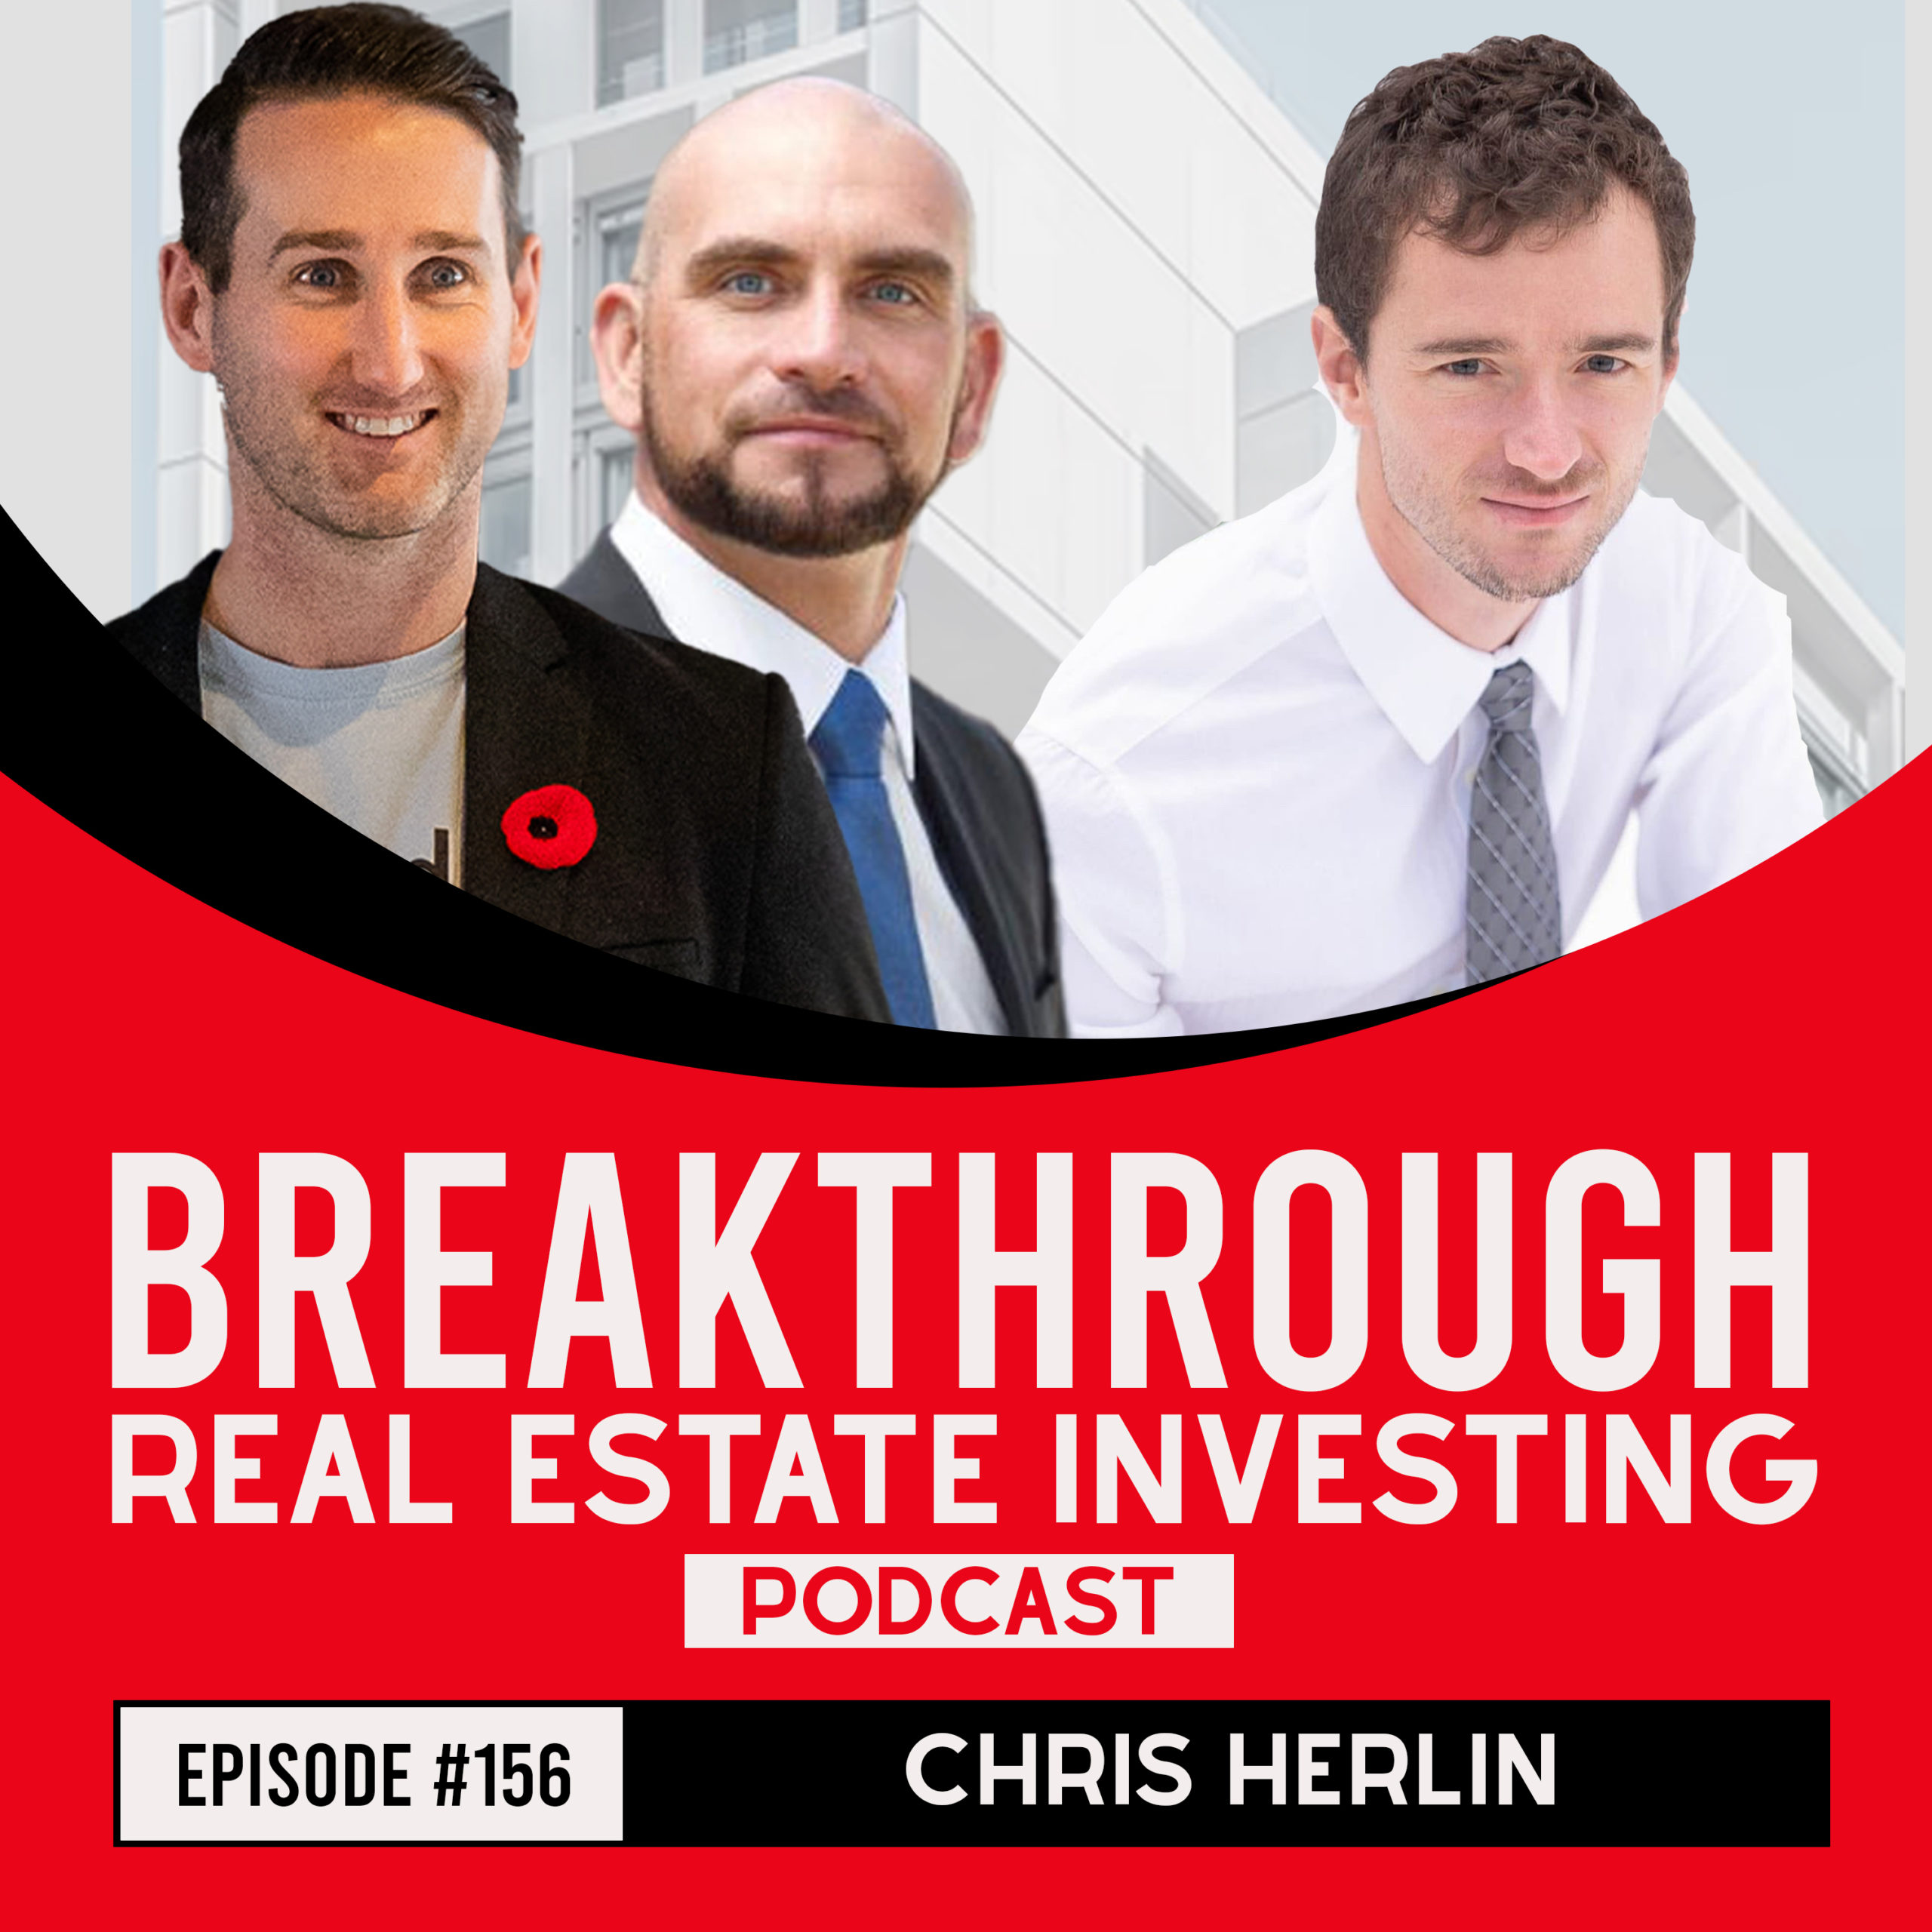 EPISODE 156: Flipping Houses and Real Estate Platforms with Chris Herlin